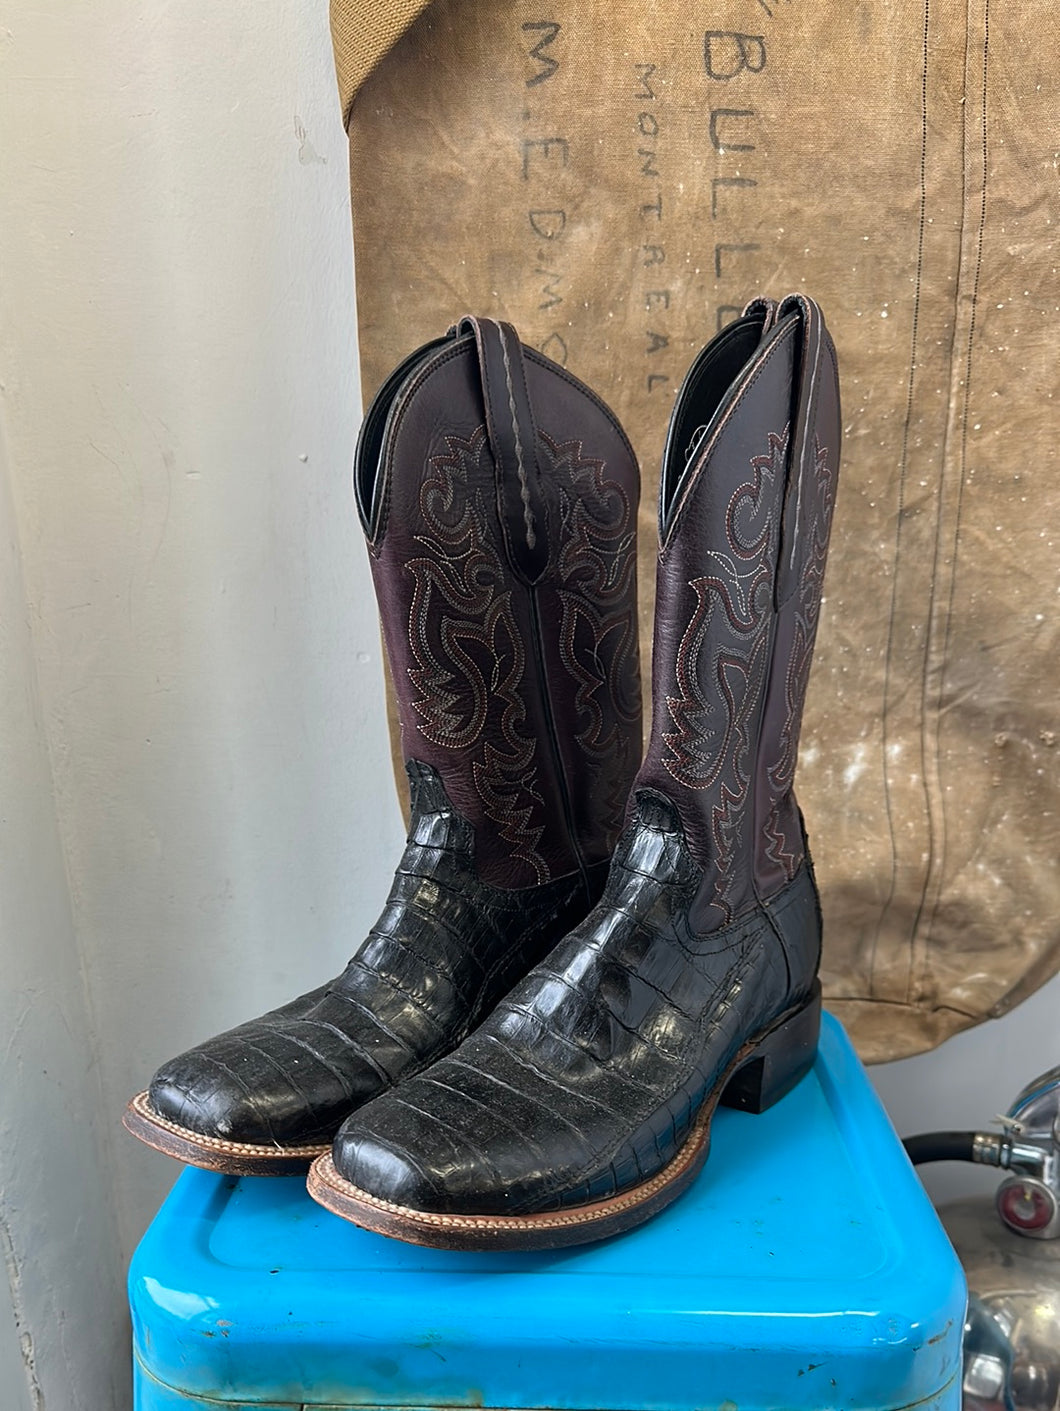 Lucchese Crocodile Cowboy Boots - Size 8 M 9.5 W